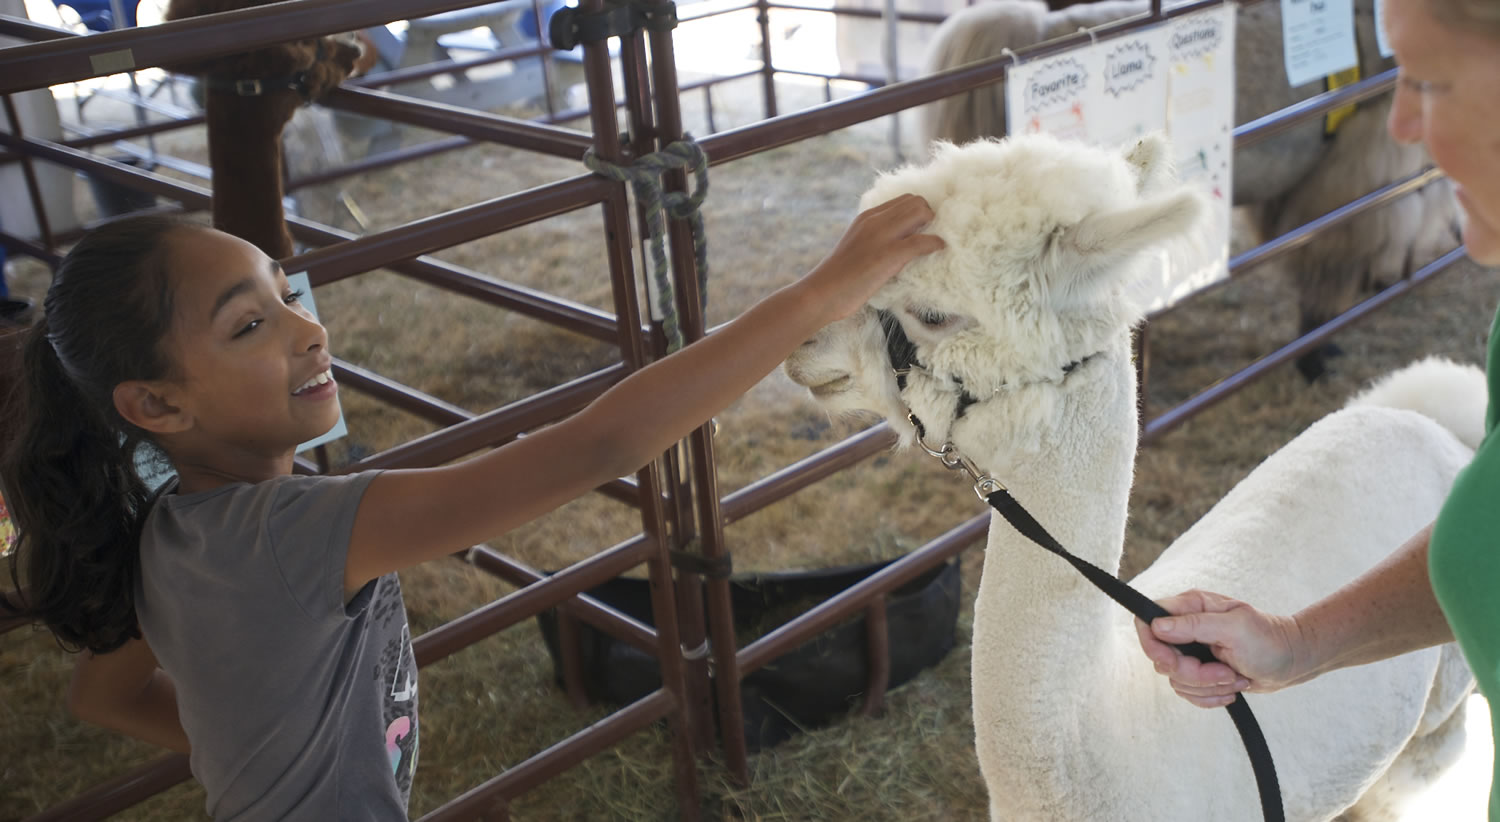 Olivia Courson, 9, of Battle Ground pets Jean-Pierre, an alpaca belonging to Lori Gregory, right, at the Clark County Fair on Wednesday.